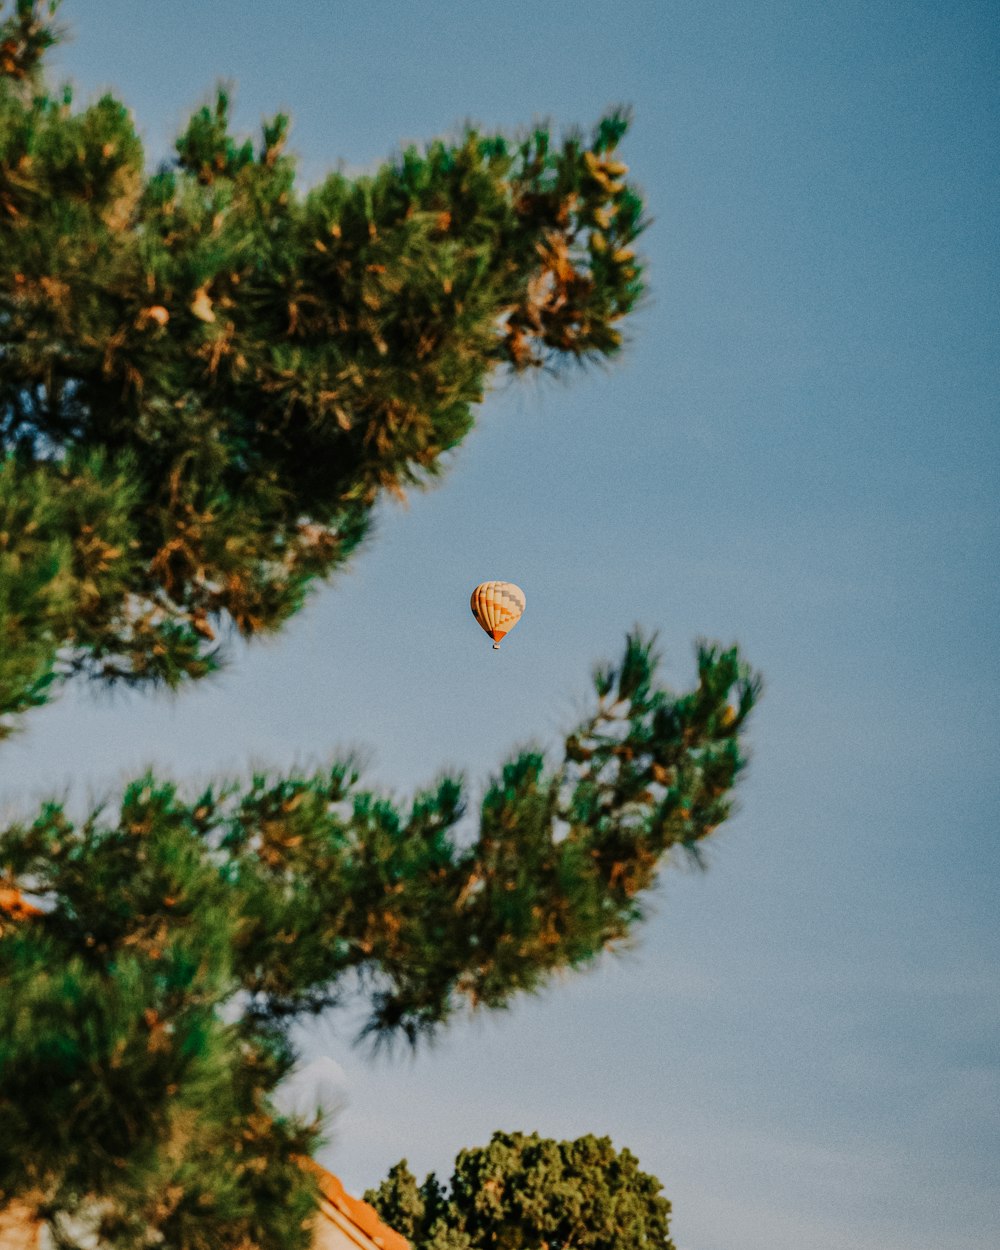 hot air balloon flying over green pine tree during daytime